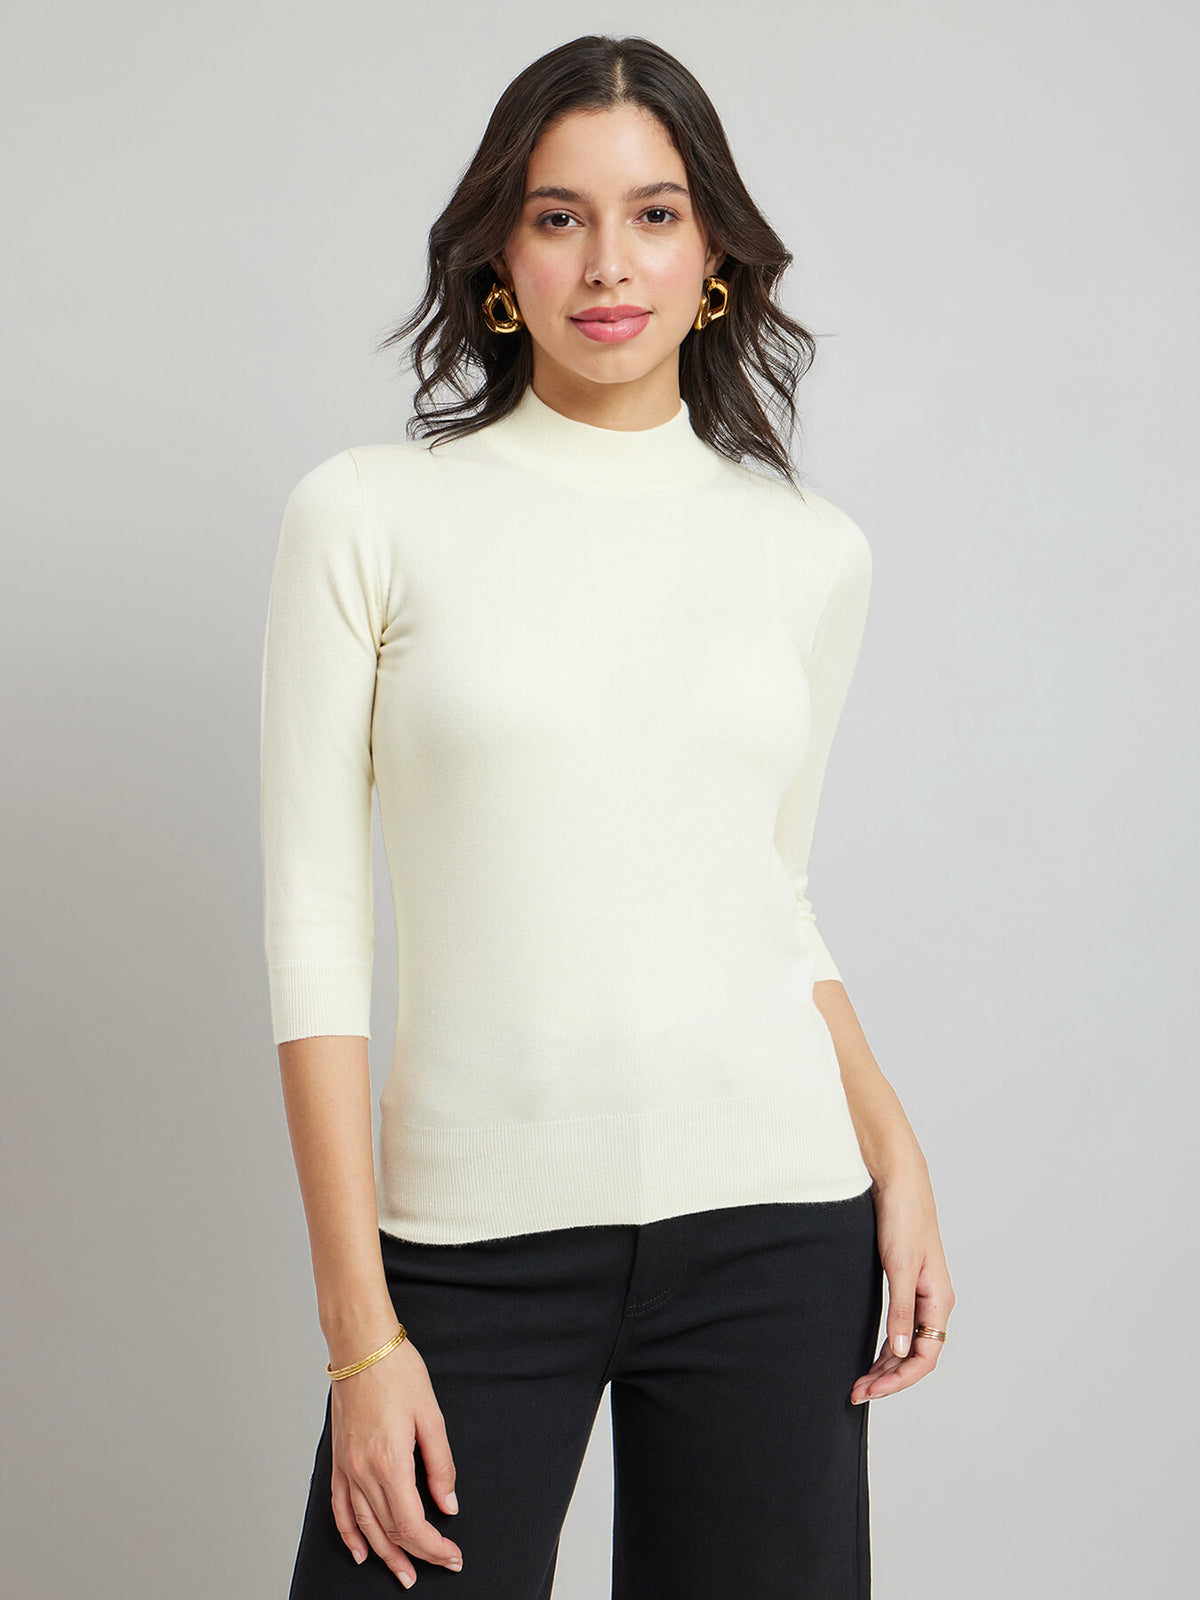 LivSoft Round Neck Knitted Top - Off-White